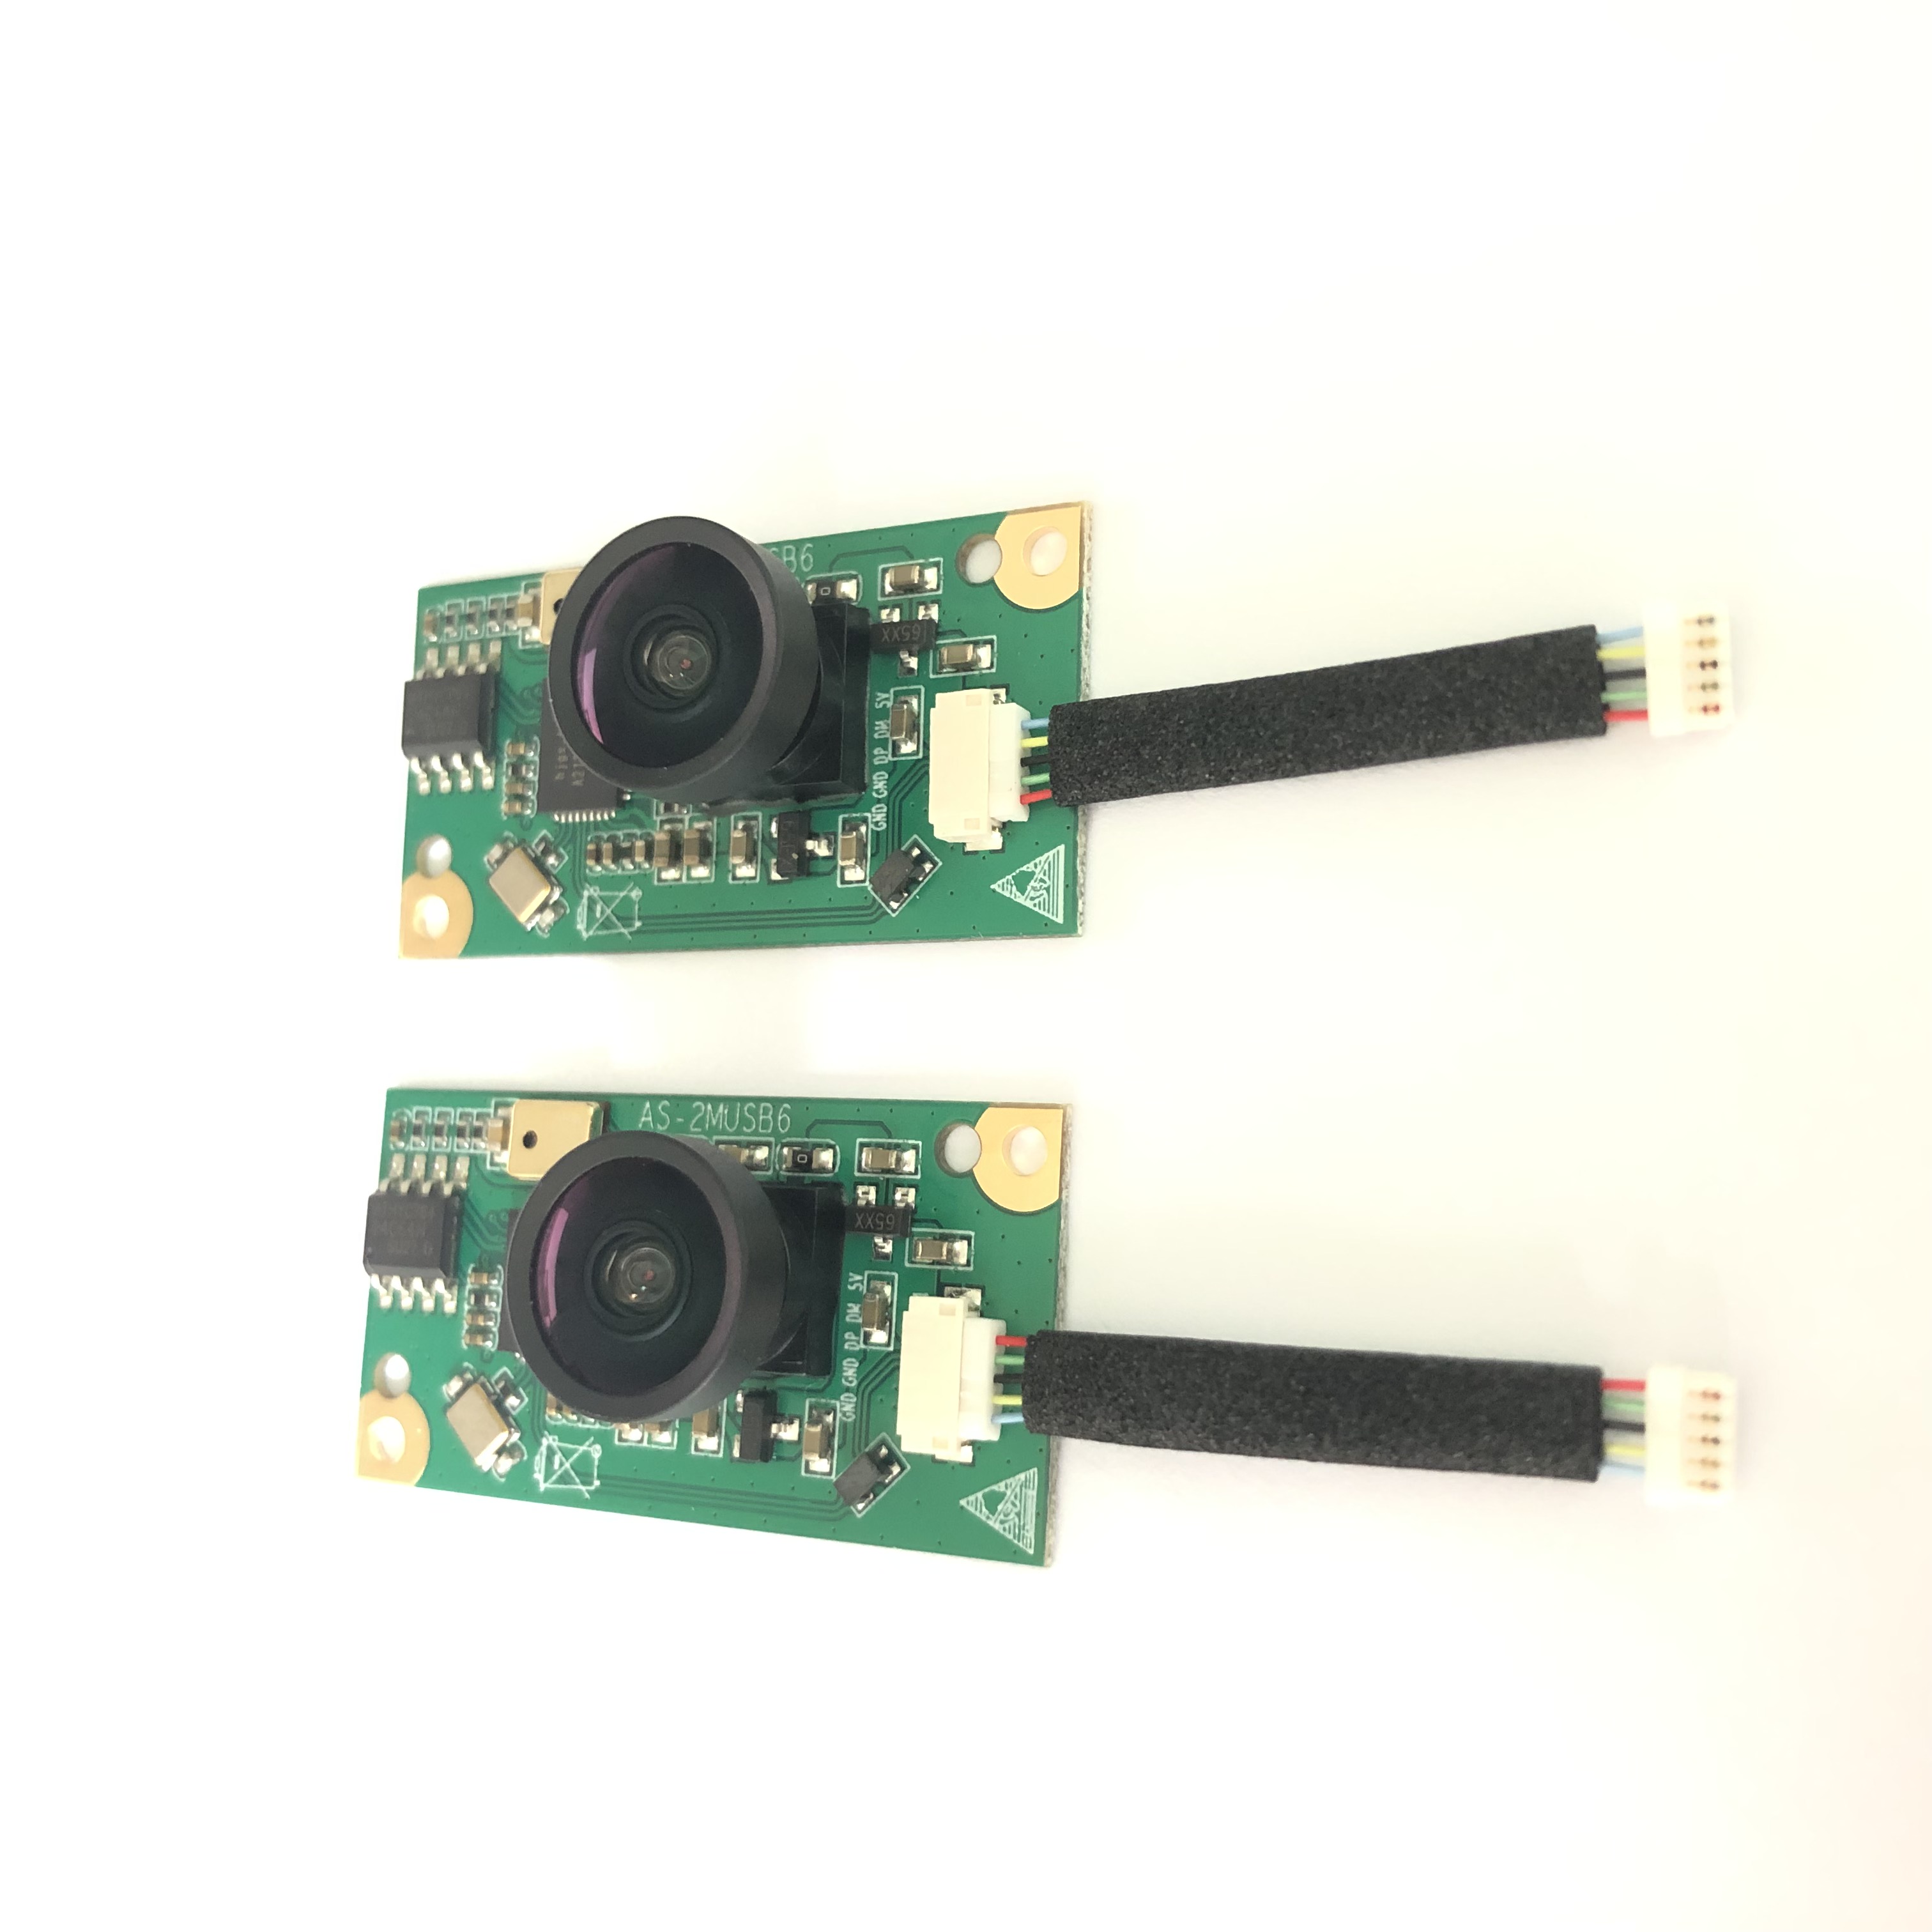 High Quality for Gc2145 Gc0308 Sensor Isp - Manufacturers USB Camera Module 200w usb 150 degree camera module For Linux – Ronghua